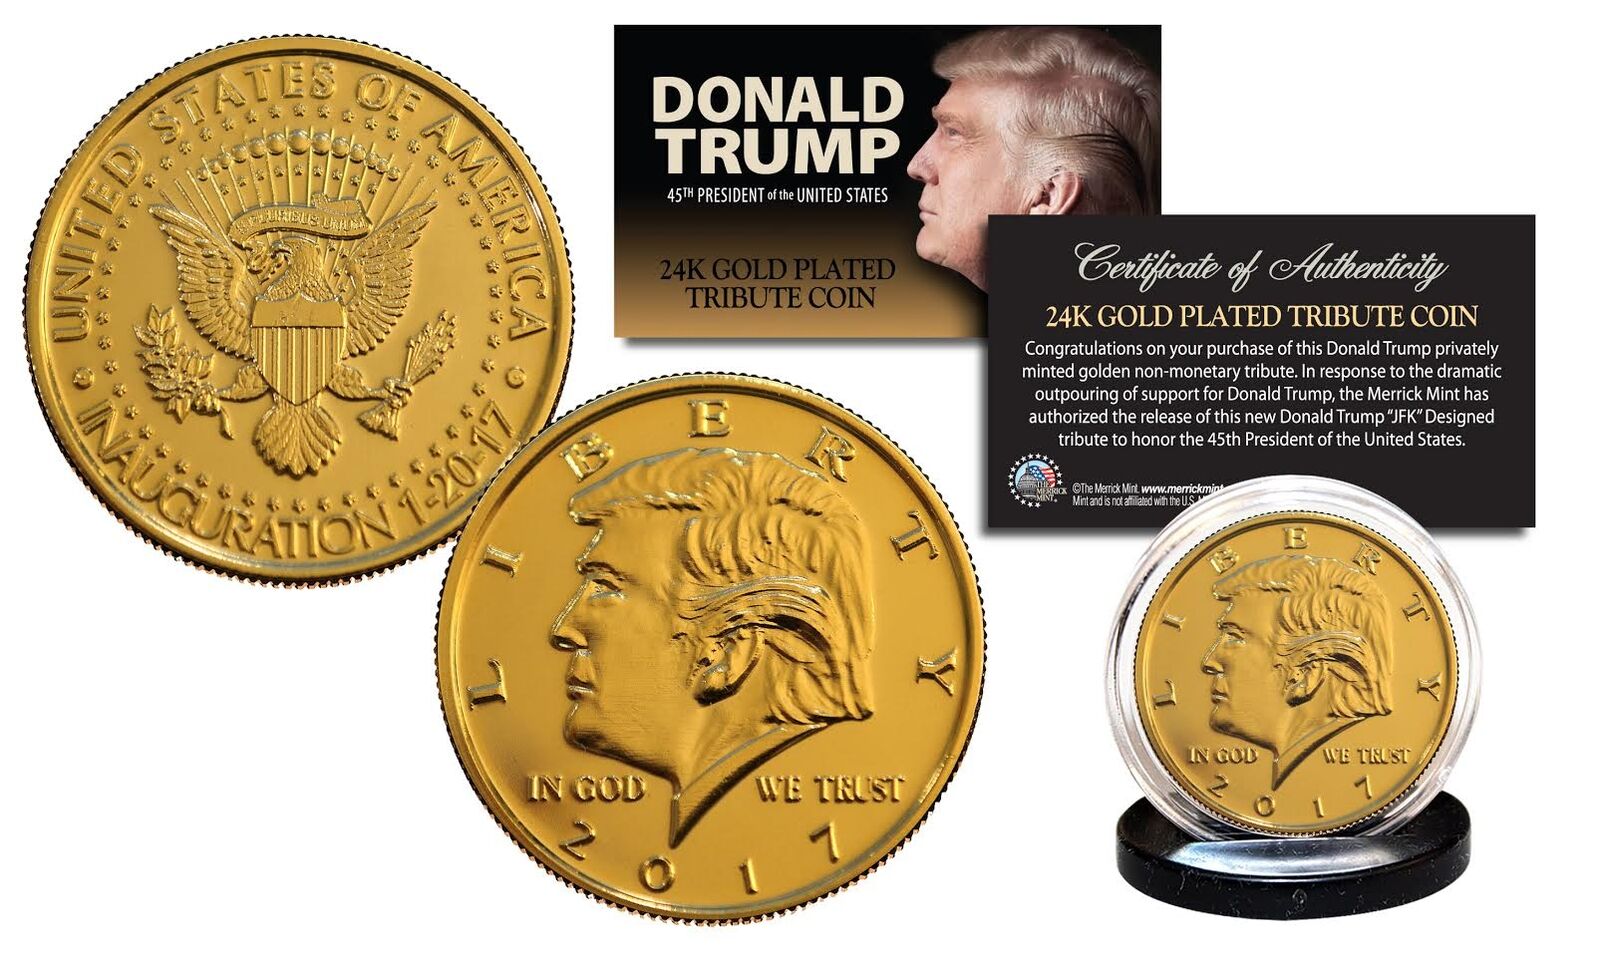 2017 DONALD TRUMP OFFICIAL Presidential 24K Gold Plated Tribute Coin with COA